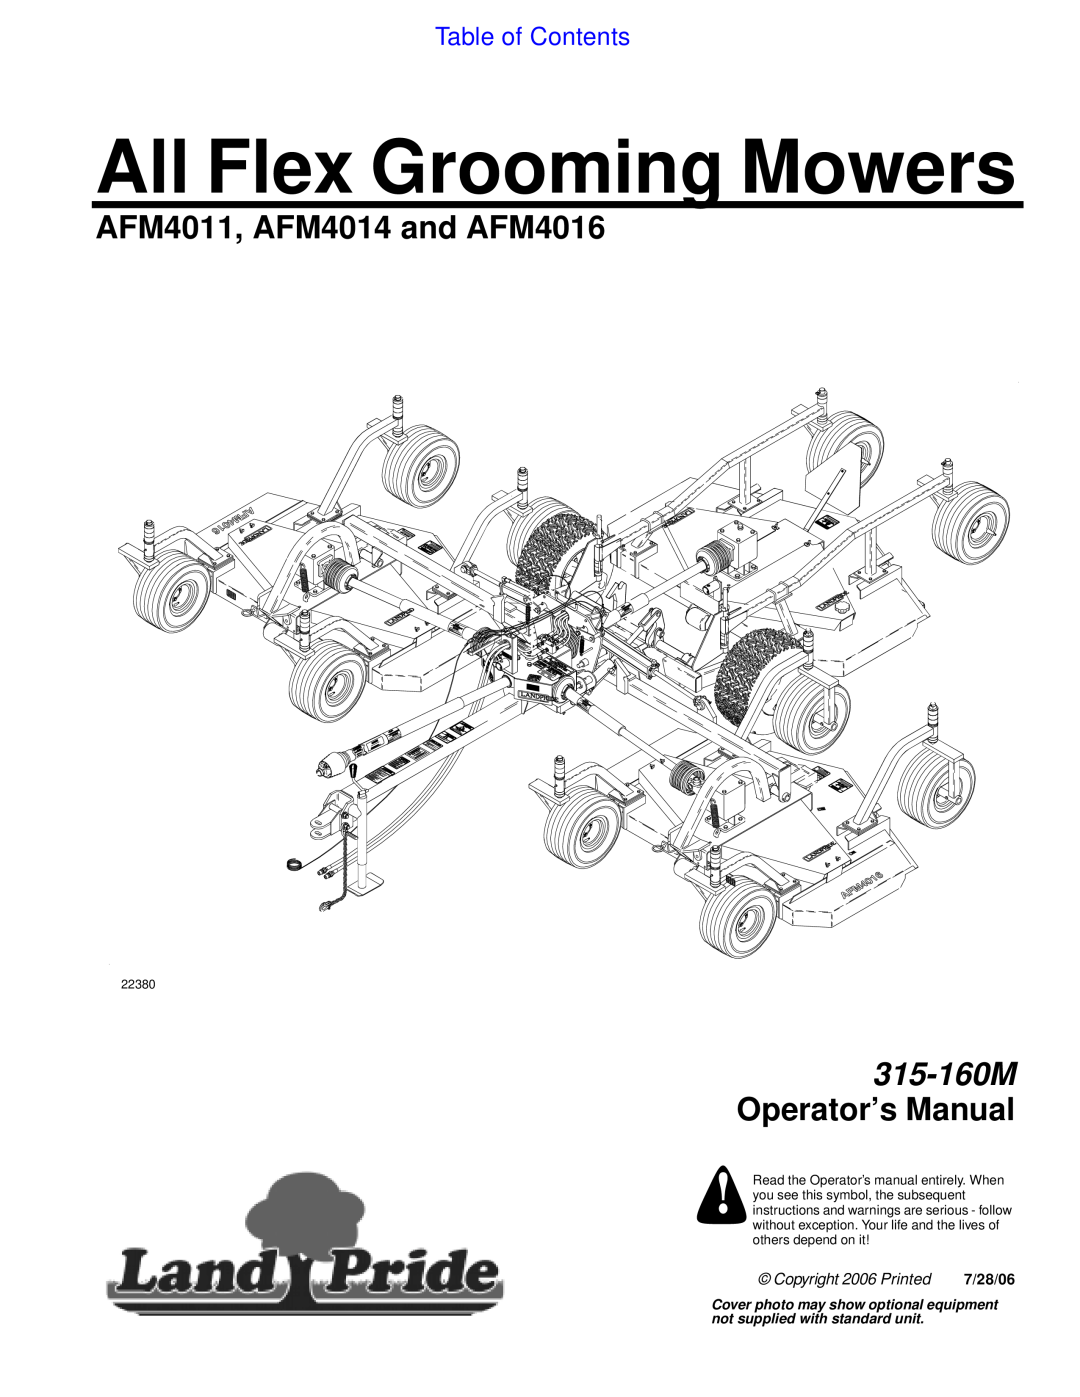 Land Pride manual Table of Contents, All Flex Grooming Mowers, AFM4011, AFM4014 and AFM4016, 315-160M Operator’s Manual 